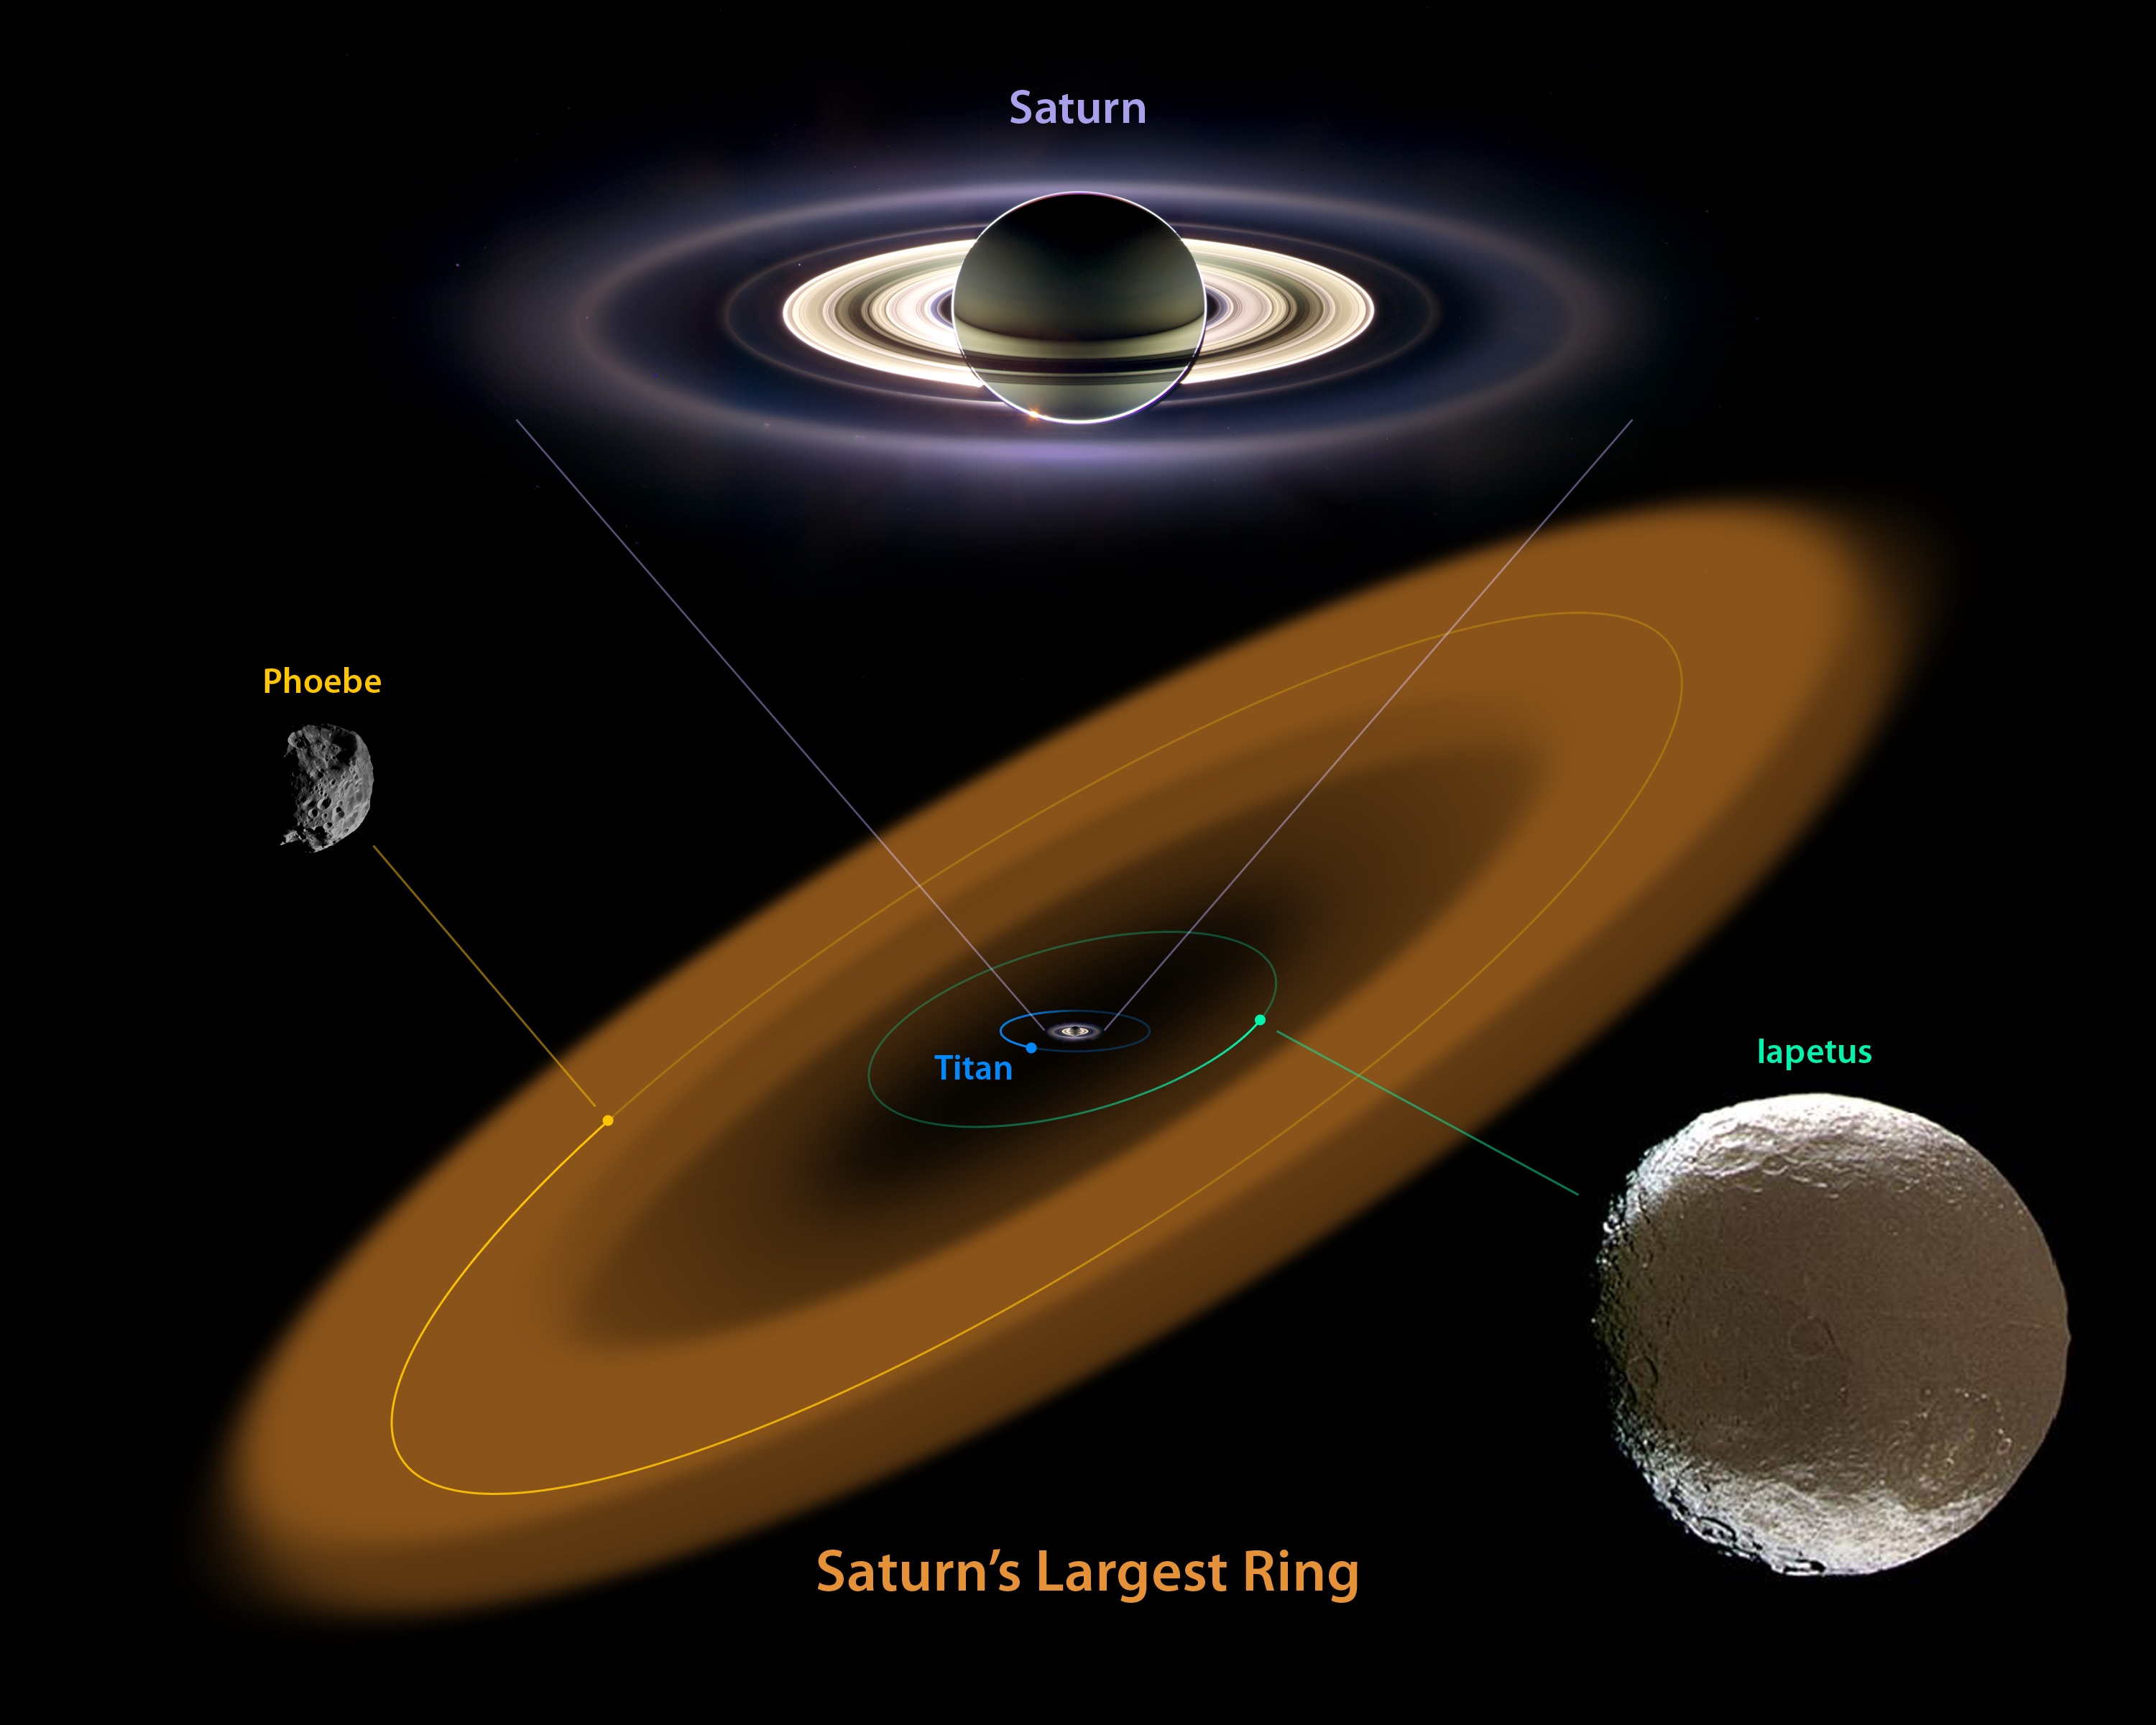 Saturn's Rings | Here's a view of Saturn's rings made from i… | Flickr